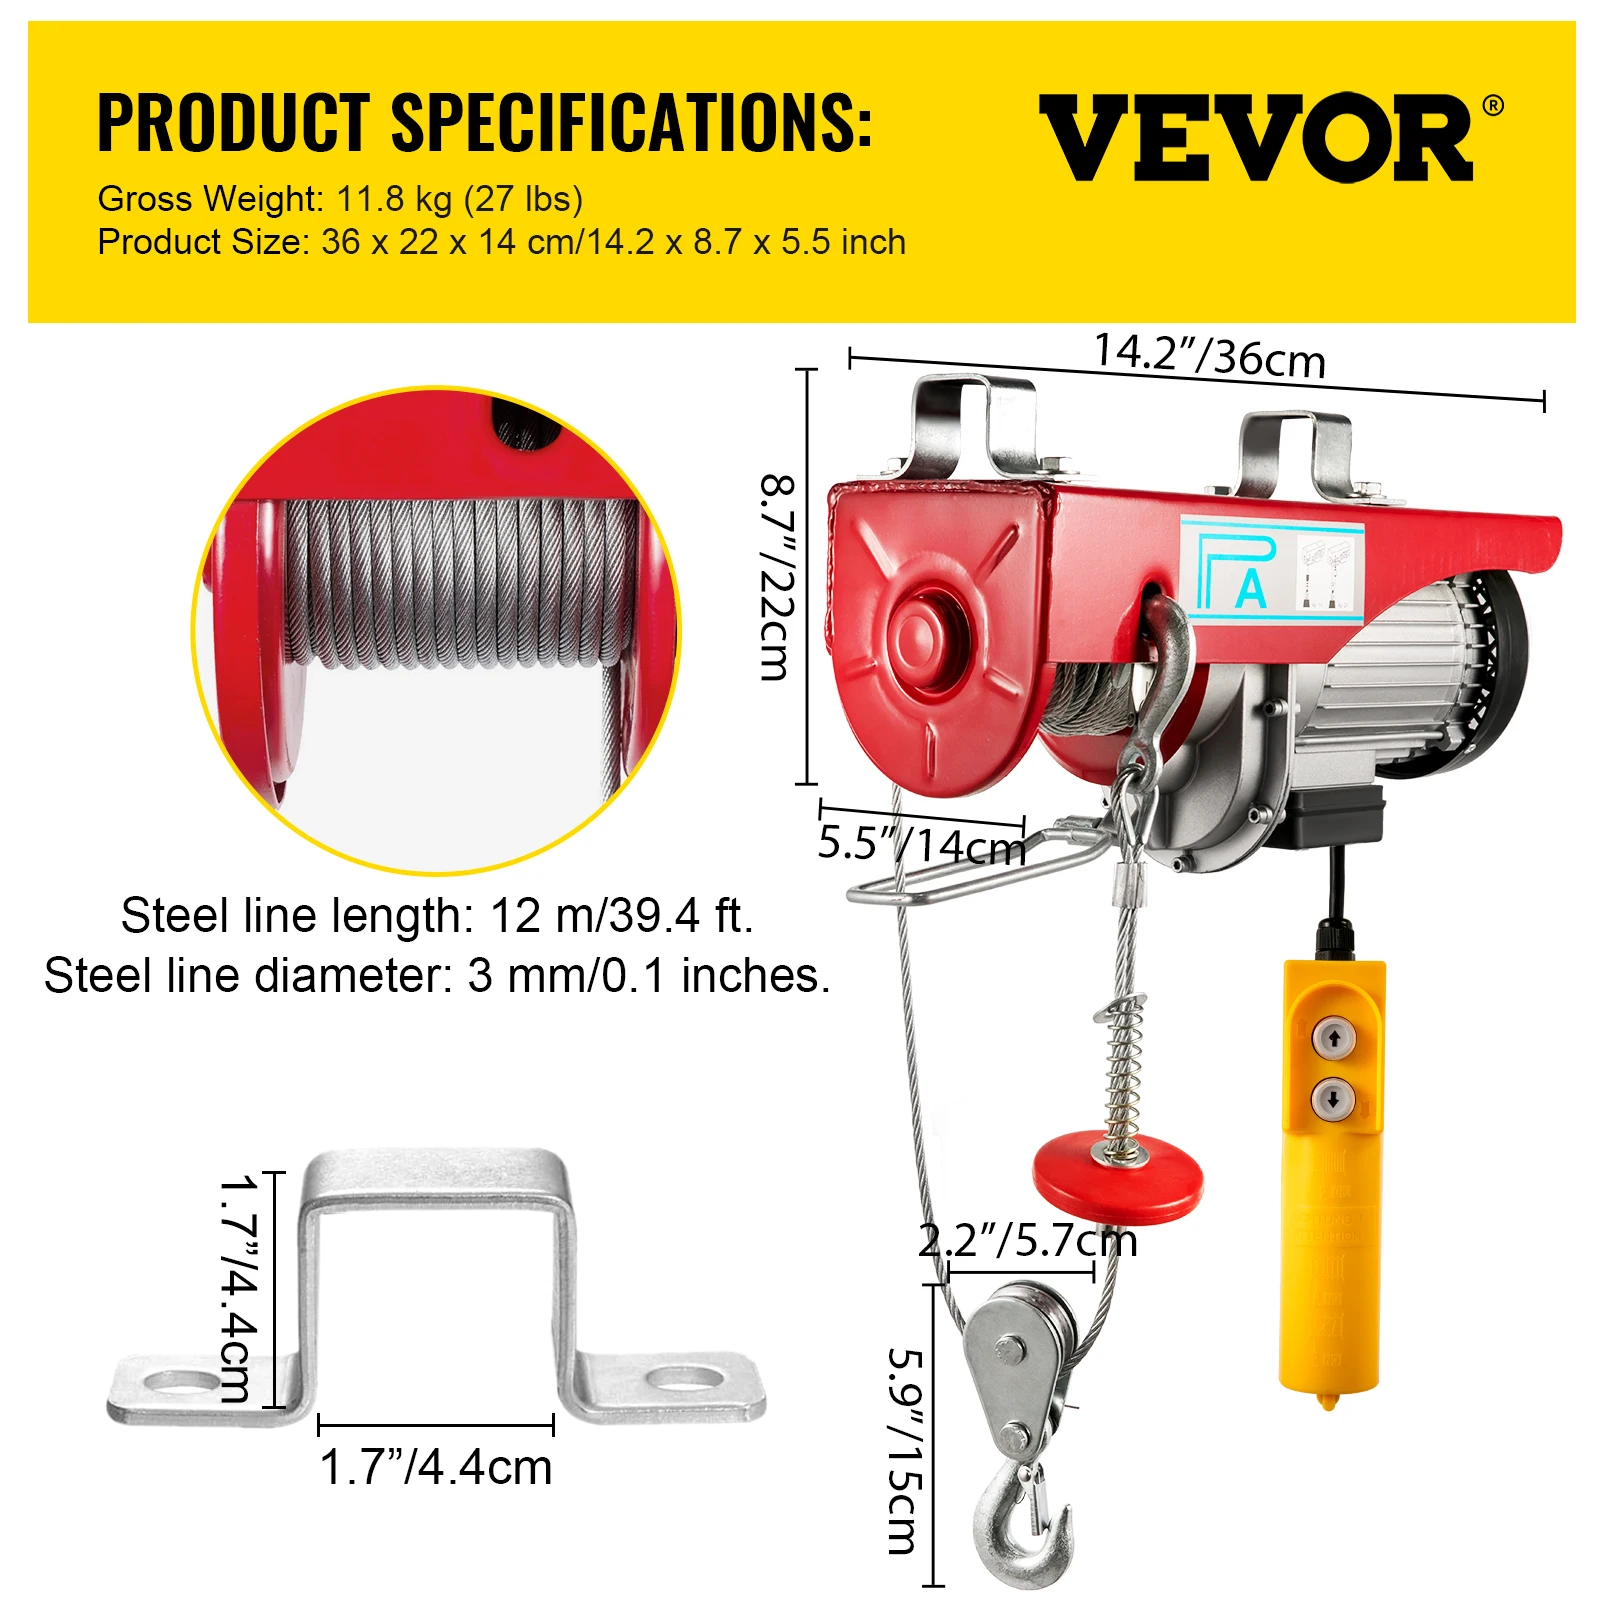 VEVOR 200-800KG Electric Hoist Crane New Portable Lifter Overhead Garage Winch with Wired Remote Control and Limit Switch